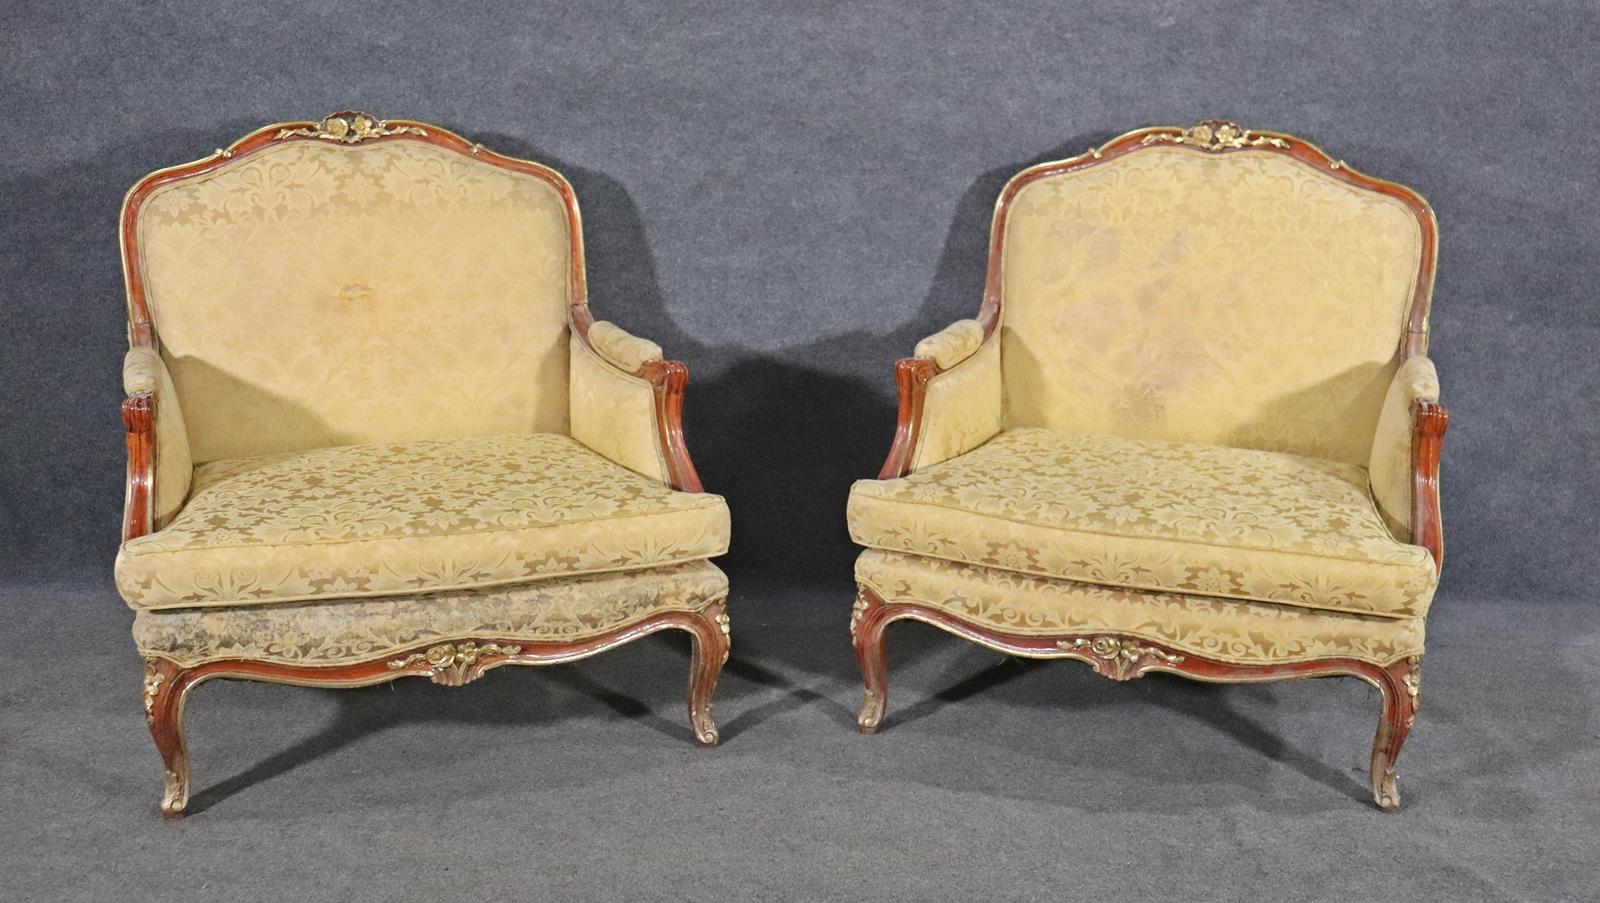 Louis XV style. Upholstered seat back and arms. Gilt accents. Measures: 39 1/2